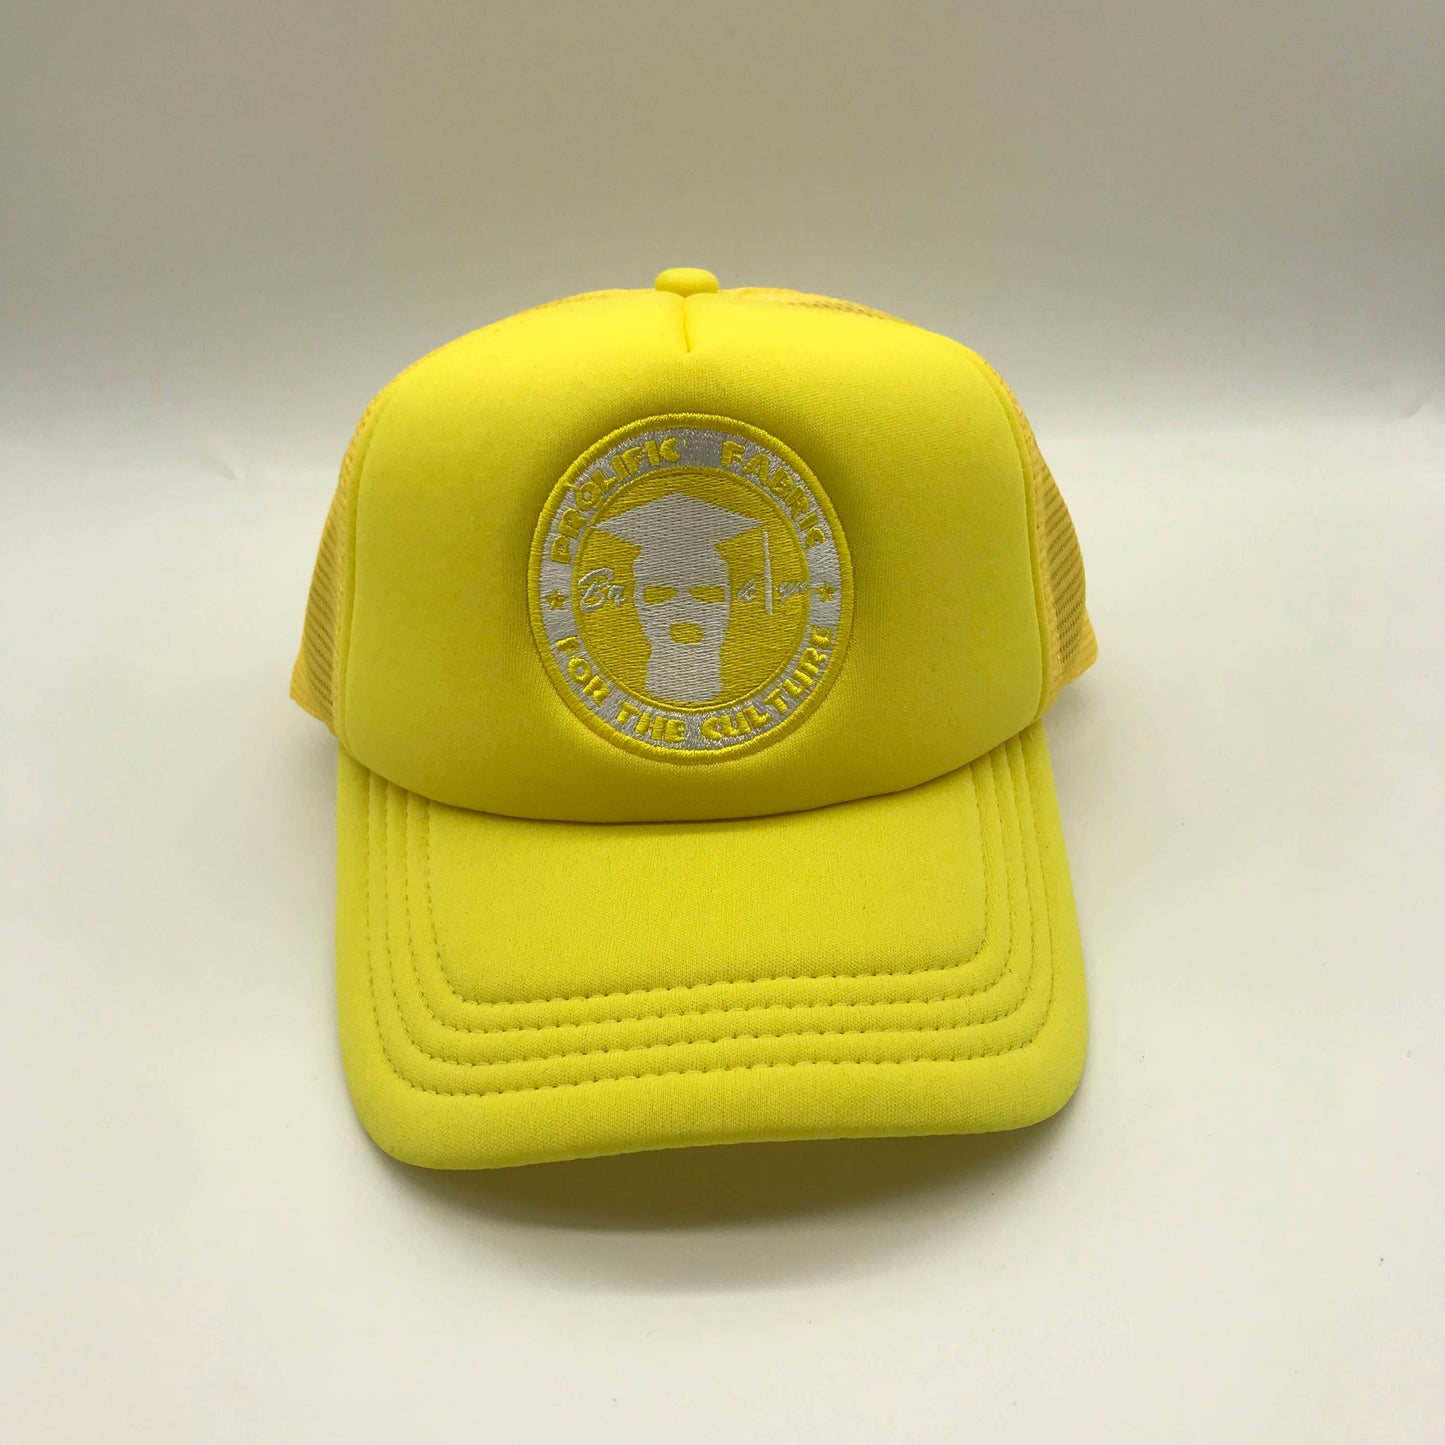 Fashion For The Culture Trucker Hats